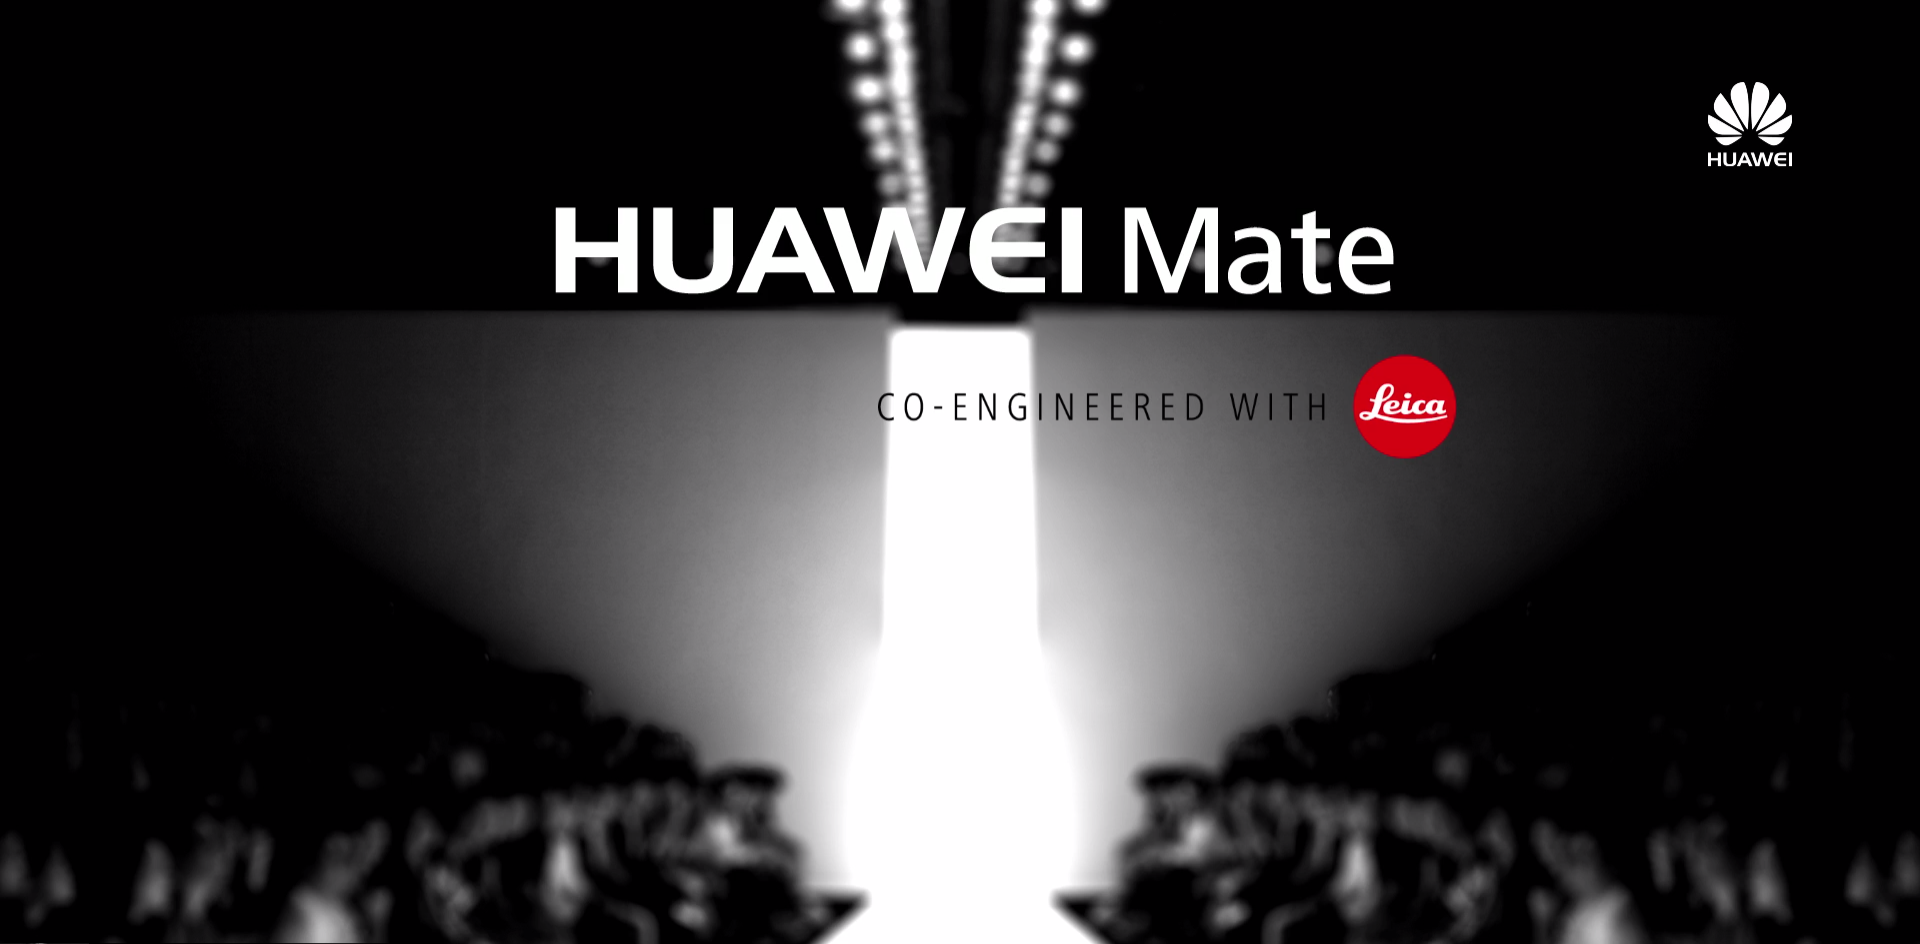 Huawei Mate 10 teaser video officially release hinting better camera features